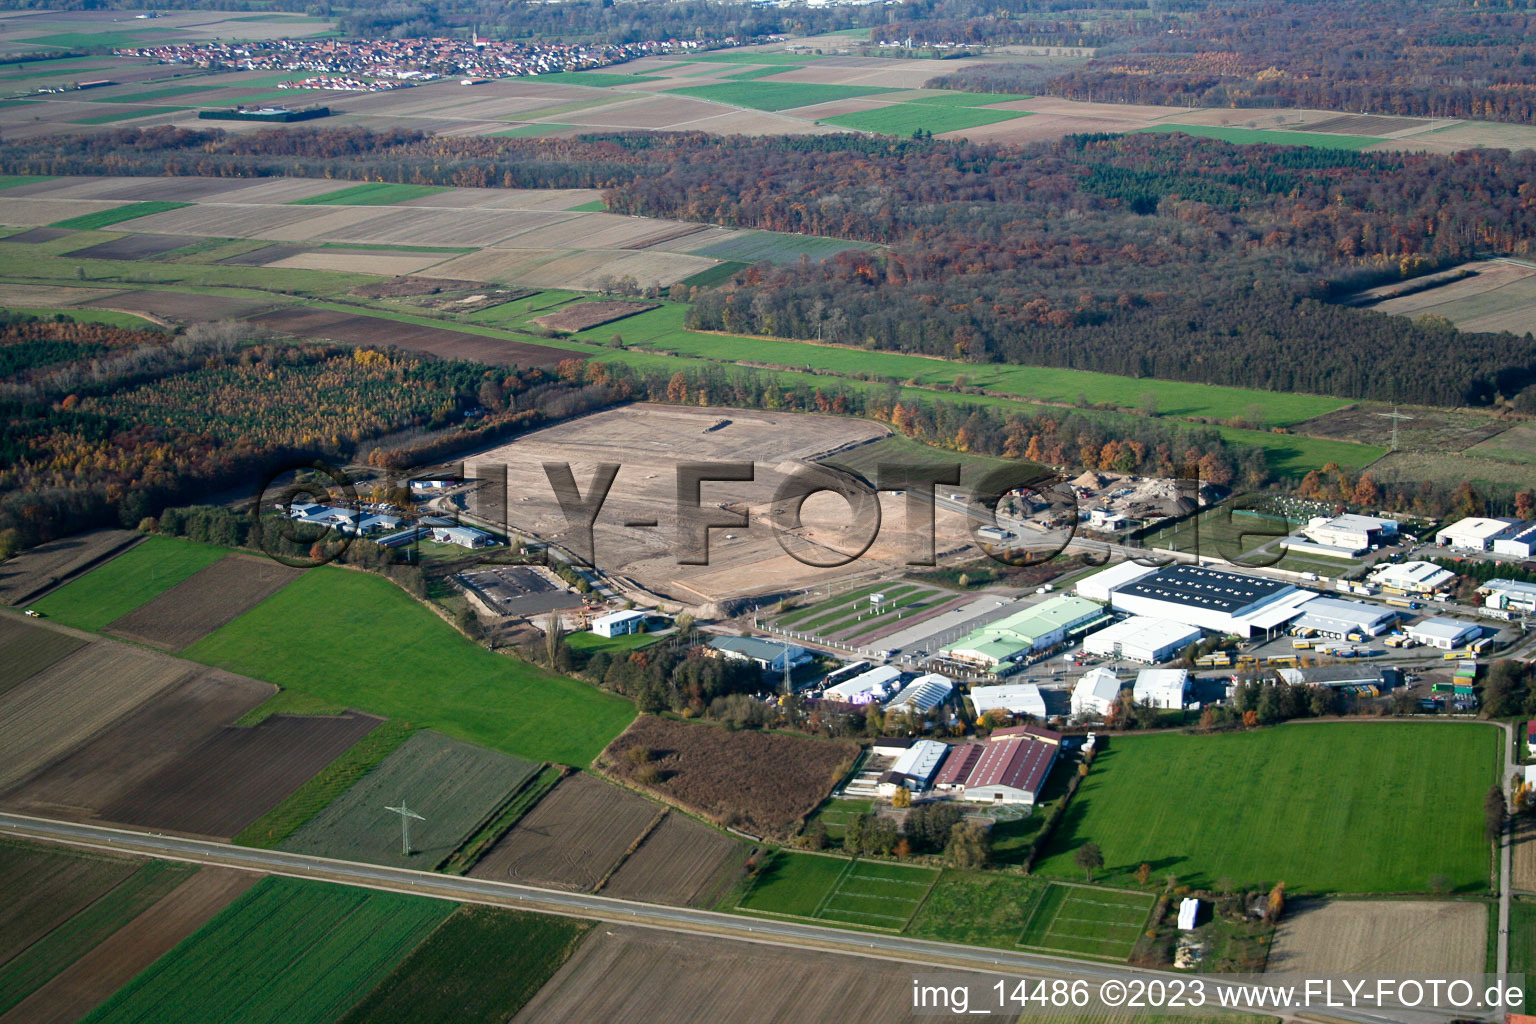 Aerial view of Am Horst industrial area in the district Minderslachen in Kandel in the state Rhineland-Palatinate, Germany